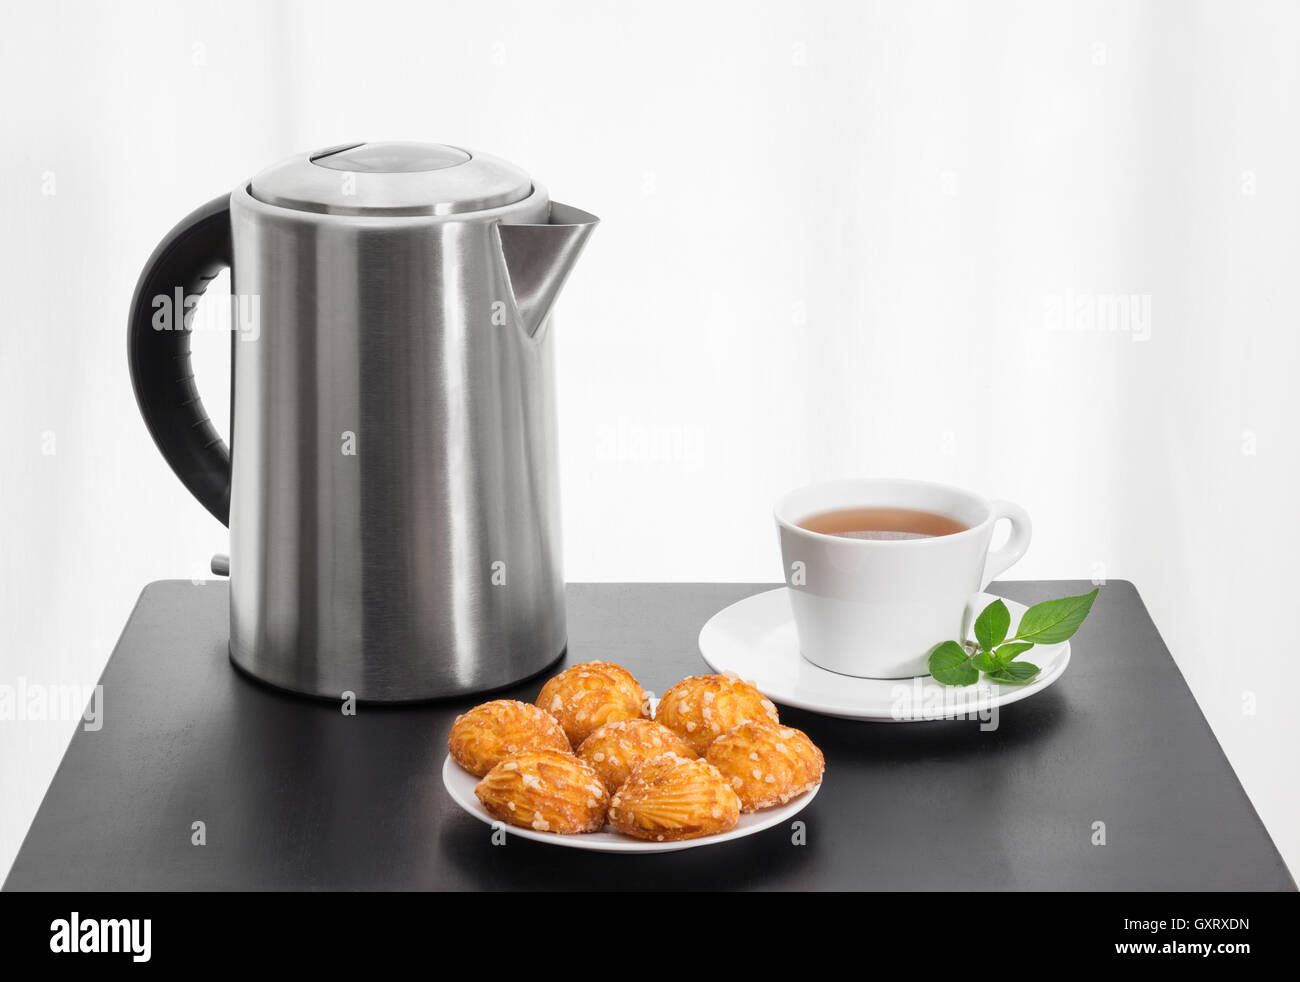 https://c8.alamy.com/comp/GXRXDN/electric-kettle-cup-of-tea-and-cookies-on-a-table-GXRXDN.jpg